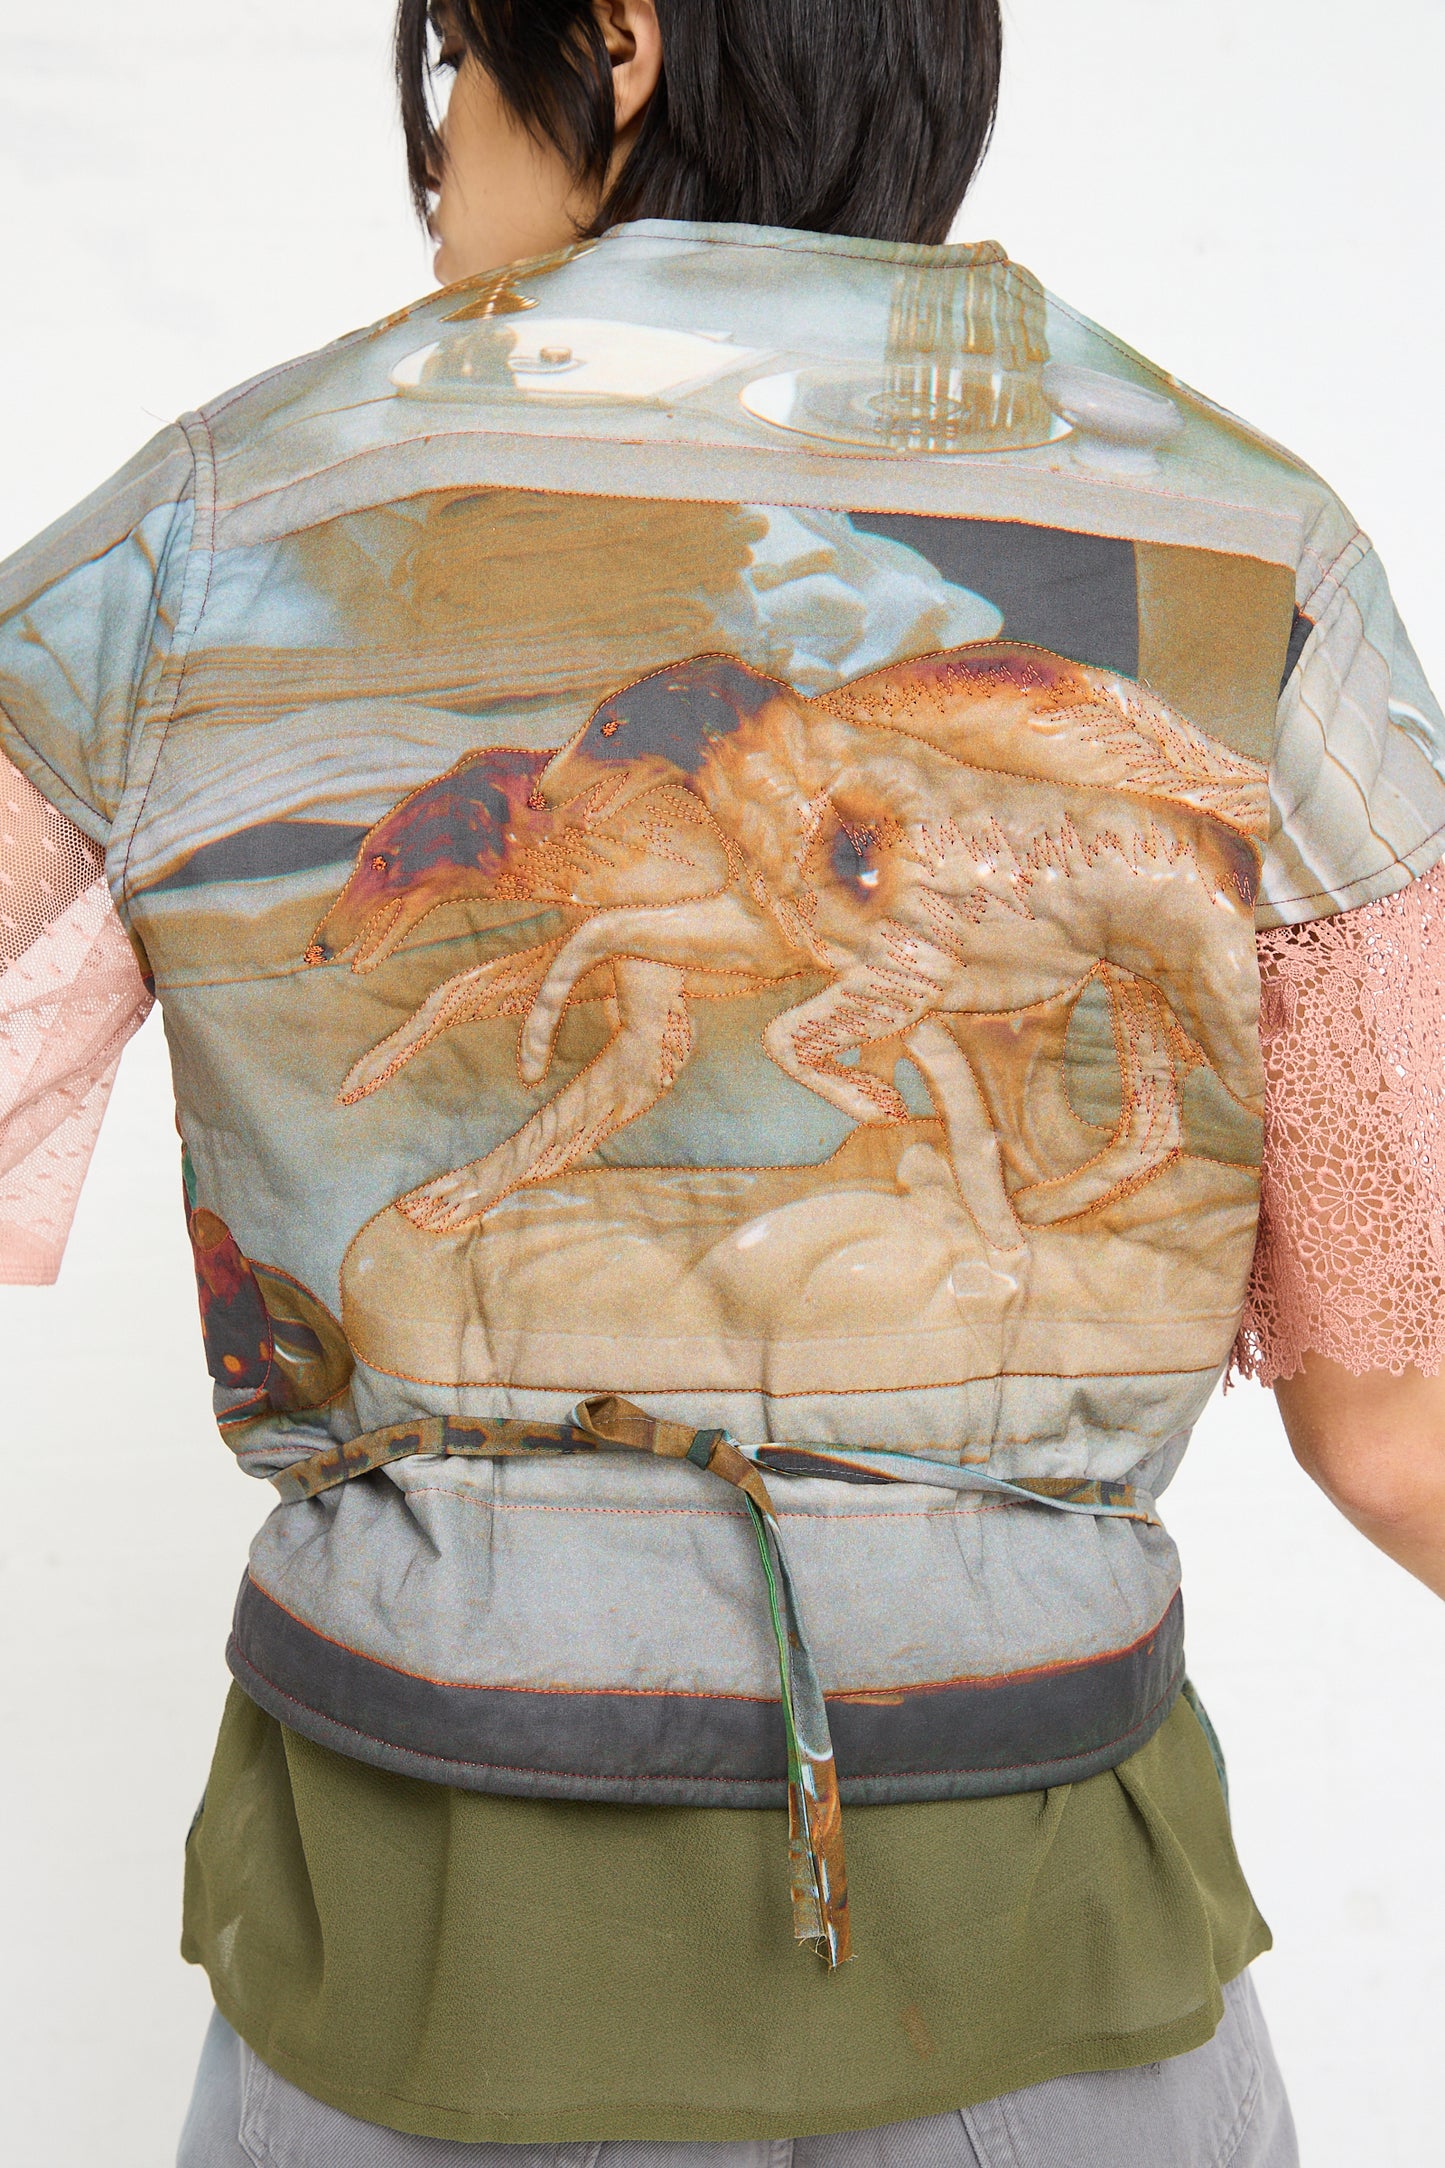 Person from behind wearing an oversized Bless cotton No. 77 Summer Living vest with a detailed crab design.